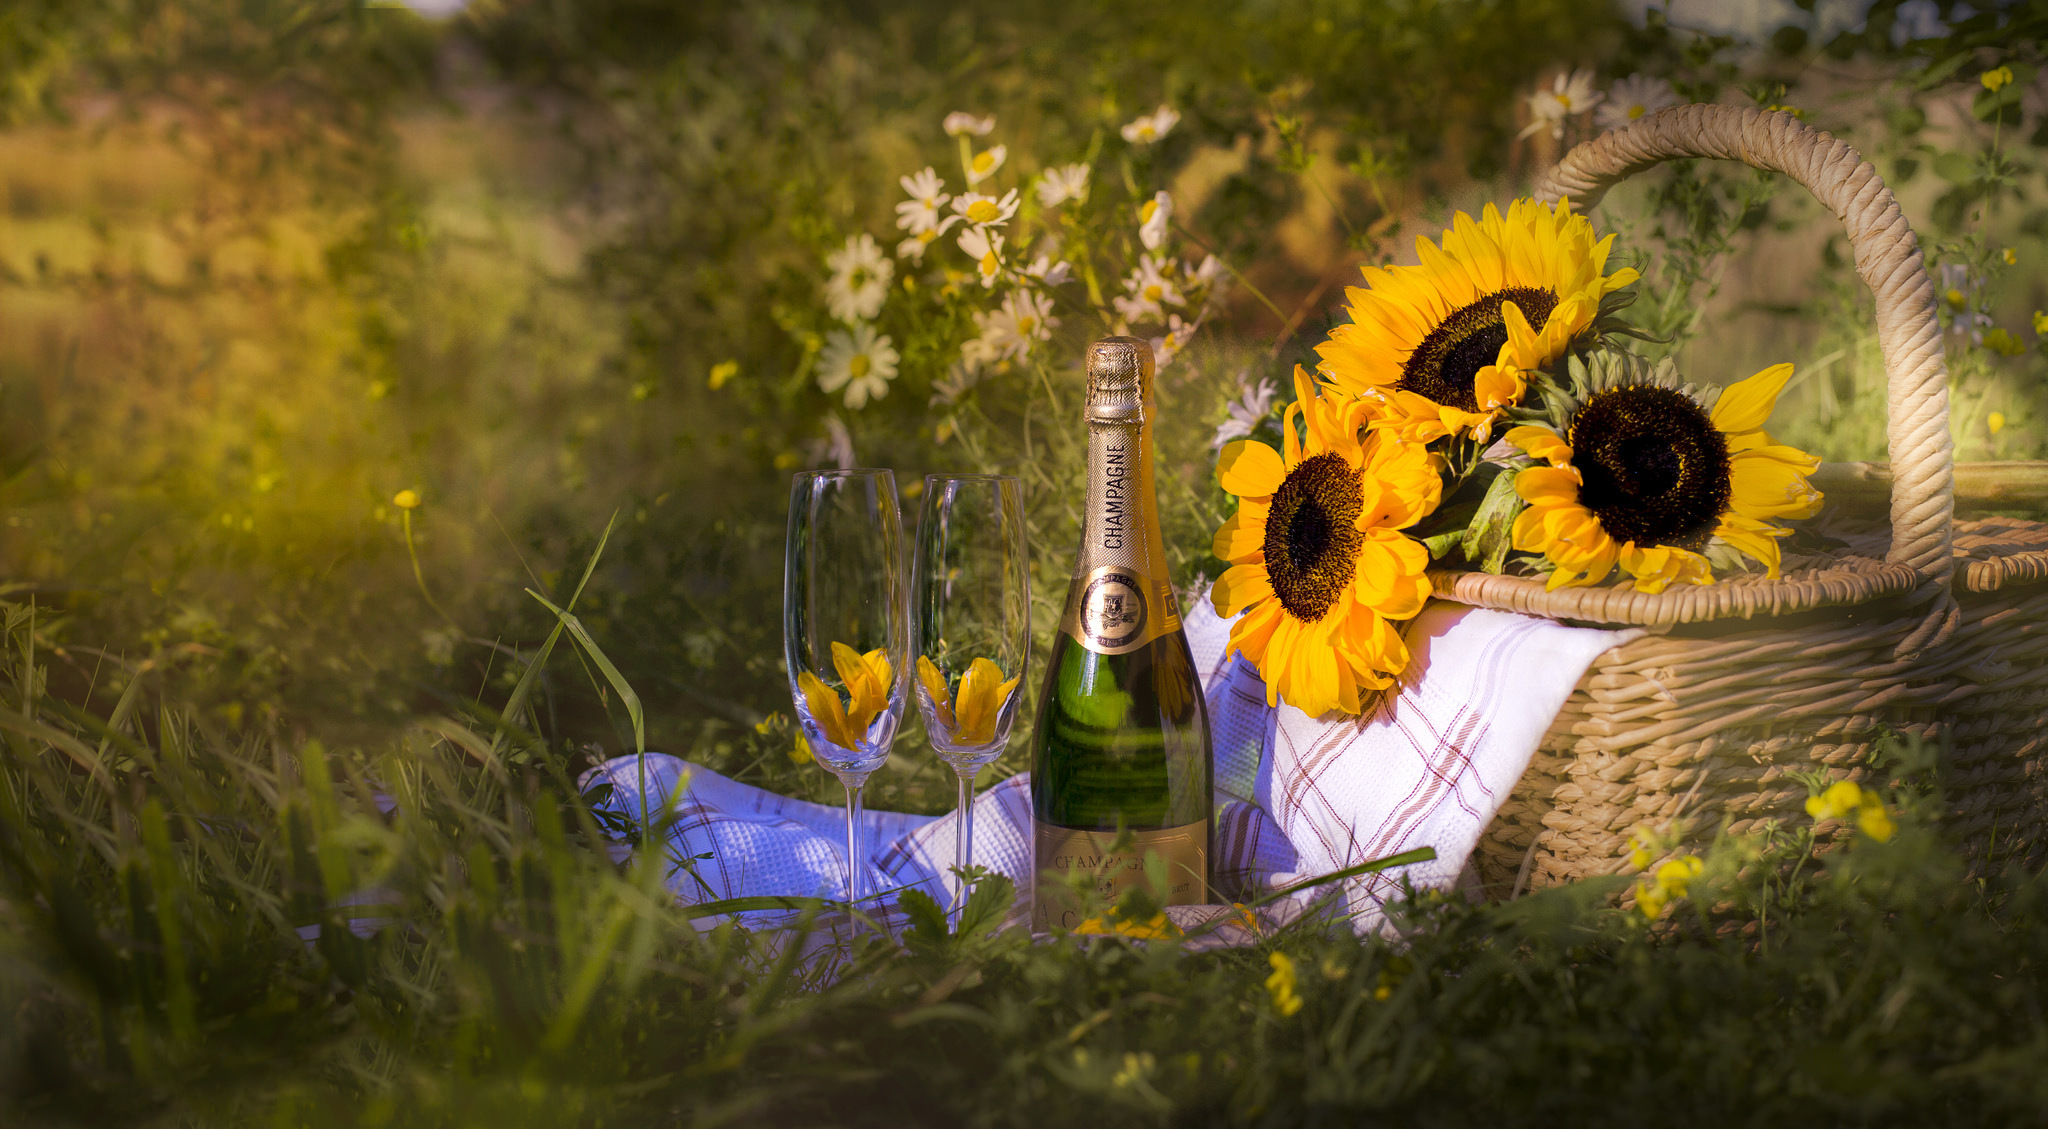 champagne, photography, still life, glass, picnic, sunflower